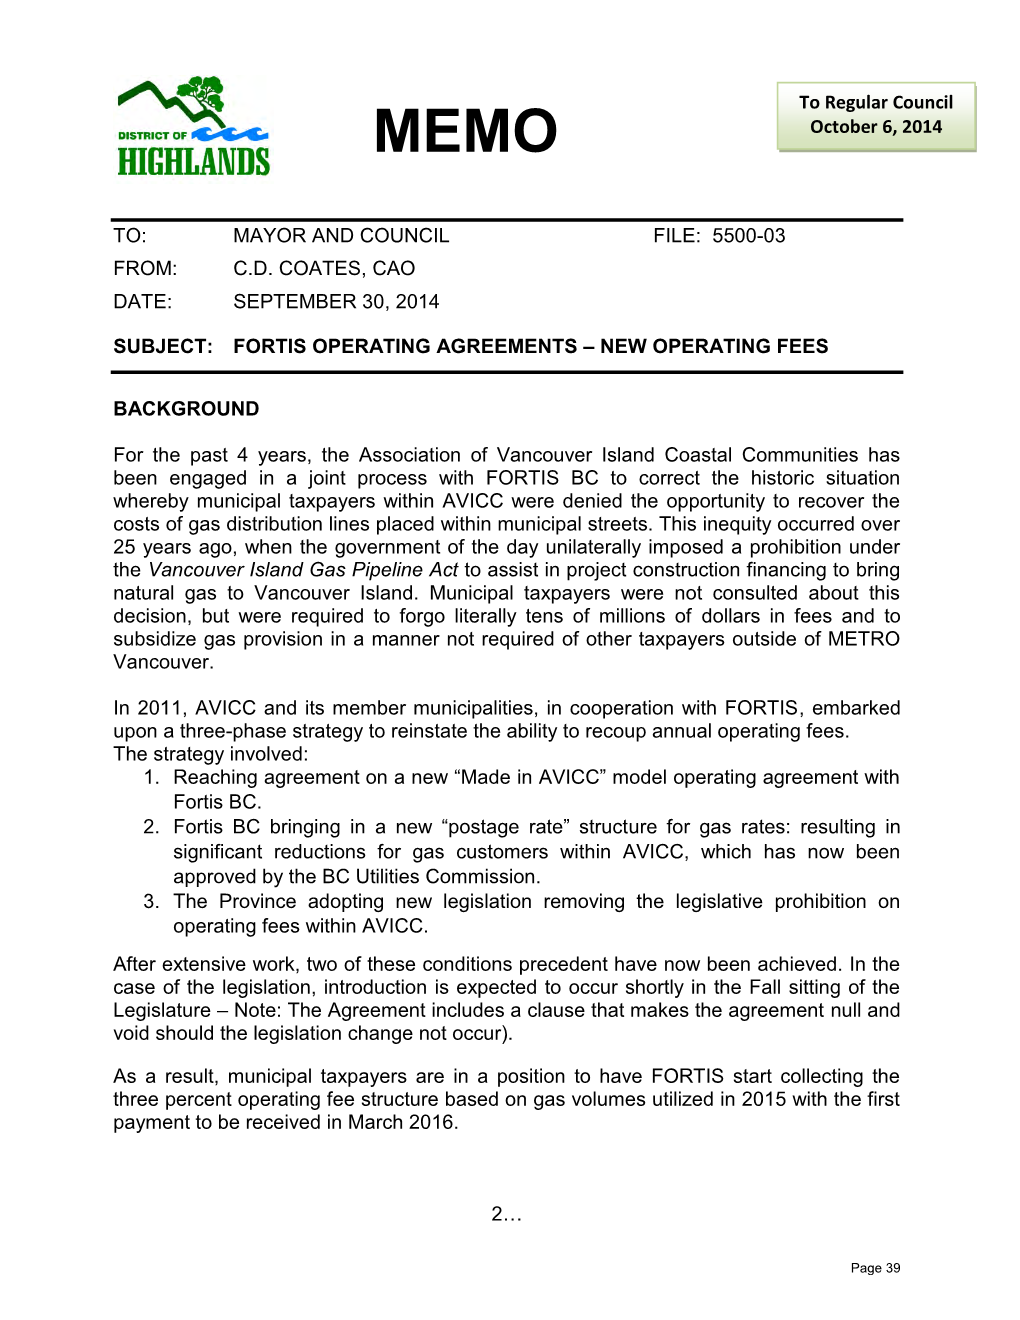 Fortis Operating Agreements – New Operating Fees